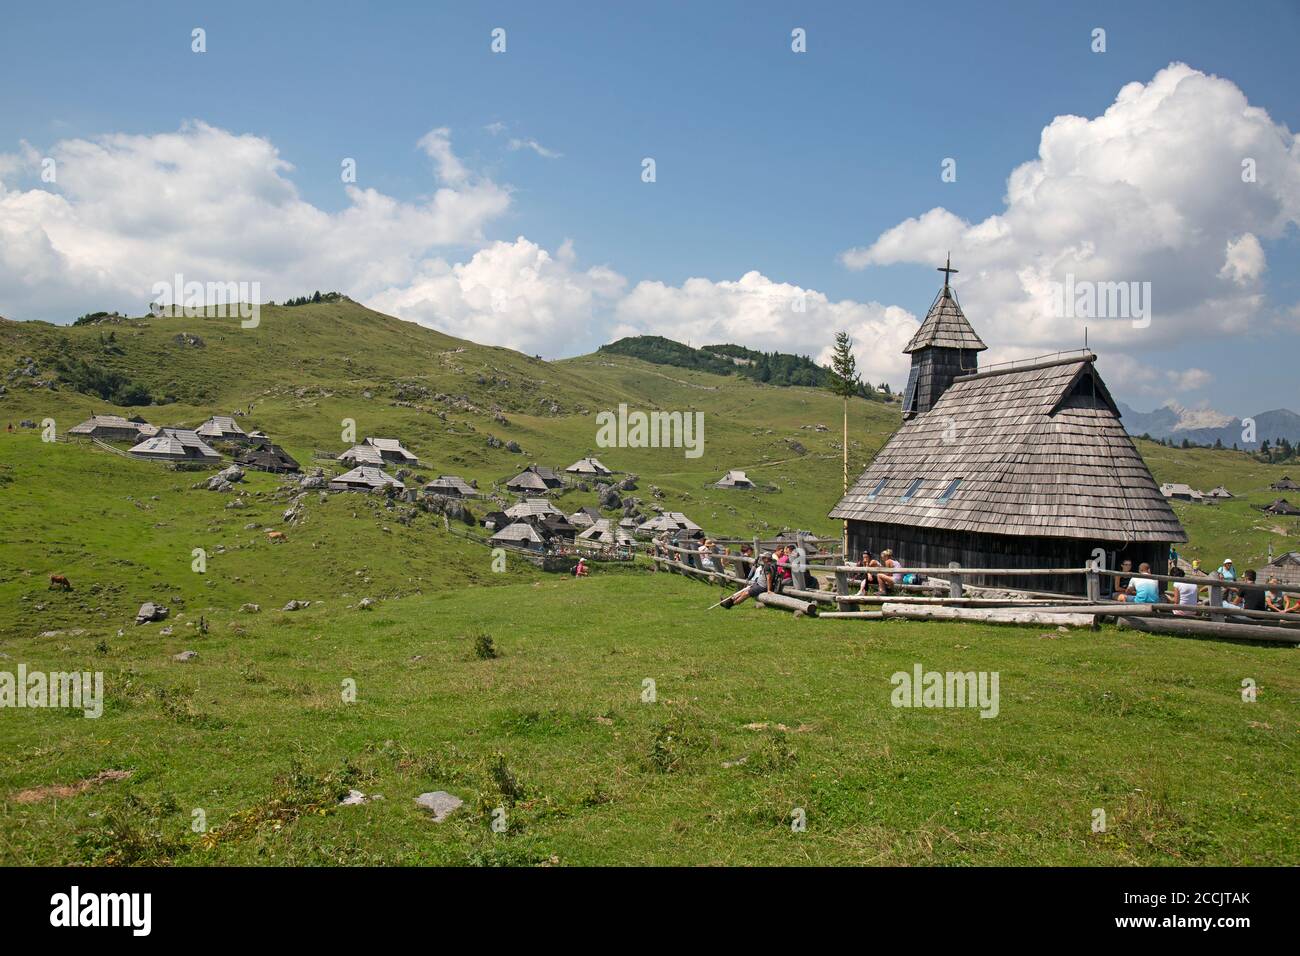 The mountain settlement village of Velika Planina in Slovenia. The village church in the foreground. Stock Photo